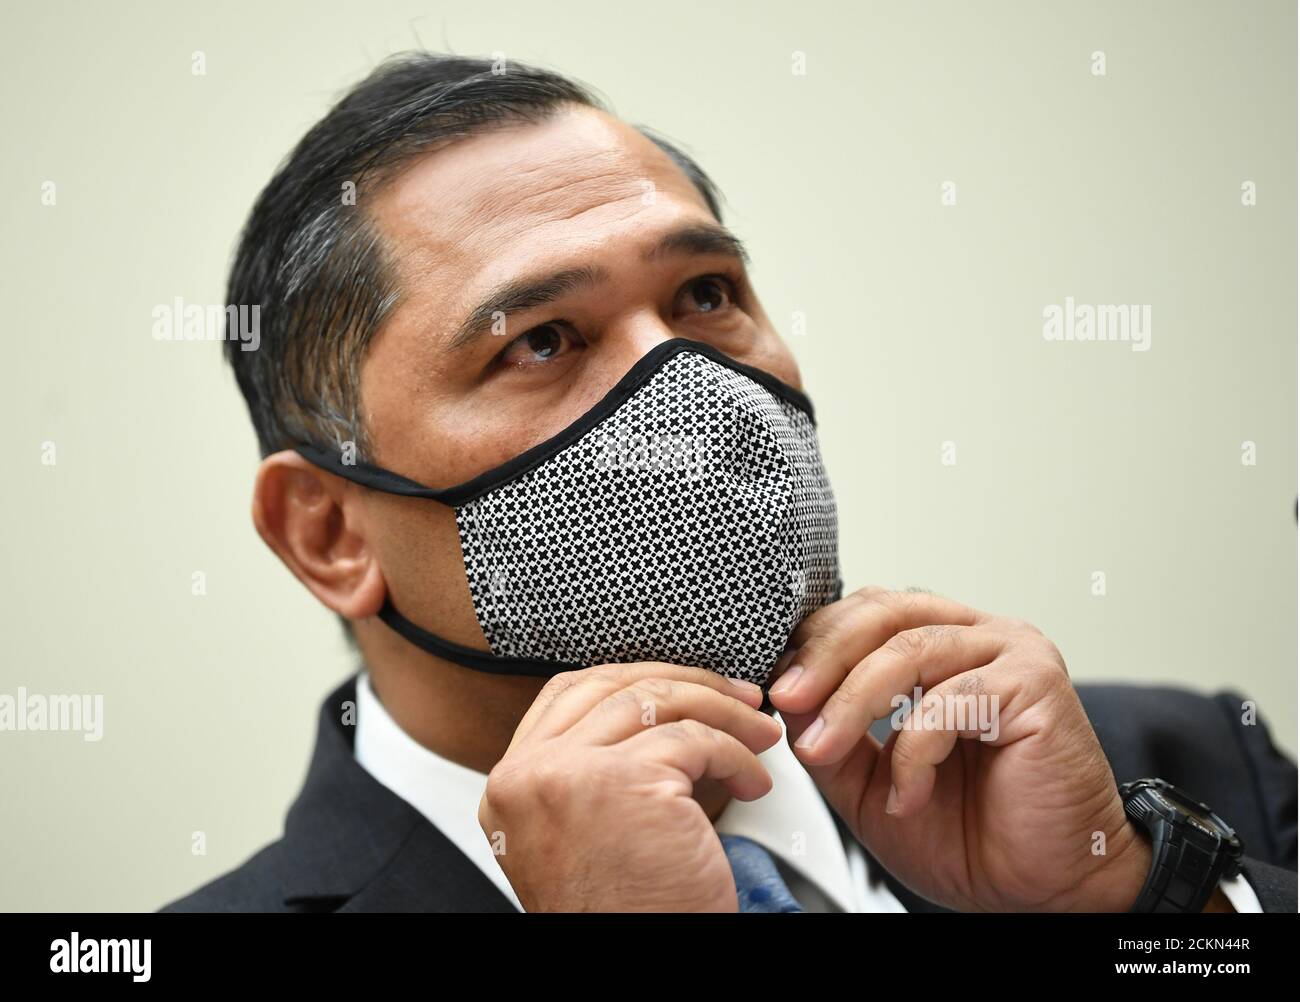 Brian Bulatao, Under Secretary of State for Management, adjusts his face mask as he testifies before a House Committee on Foreign Affairs hearing looking into the firing of State Department Inspector General Steven Linick, on Capitol Hill in Washington, DC on Wednesday, September 16, 2020. The foreign affairs committee issued the subpoenas as part of the panel's probe into accusations that Linick was fired while investigating Secretary of State Mike Pompeo's role in a controversial $8 billion weapons sale to Saudi Arabia. Photo by Kevin Dietsch/UPI Stock Photo